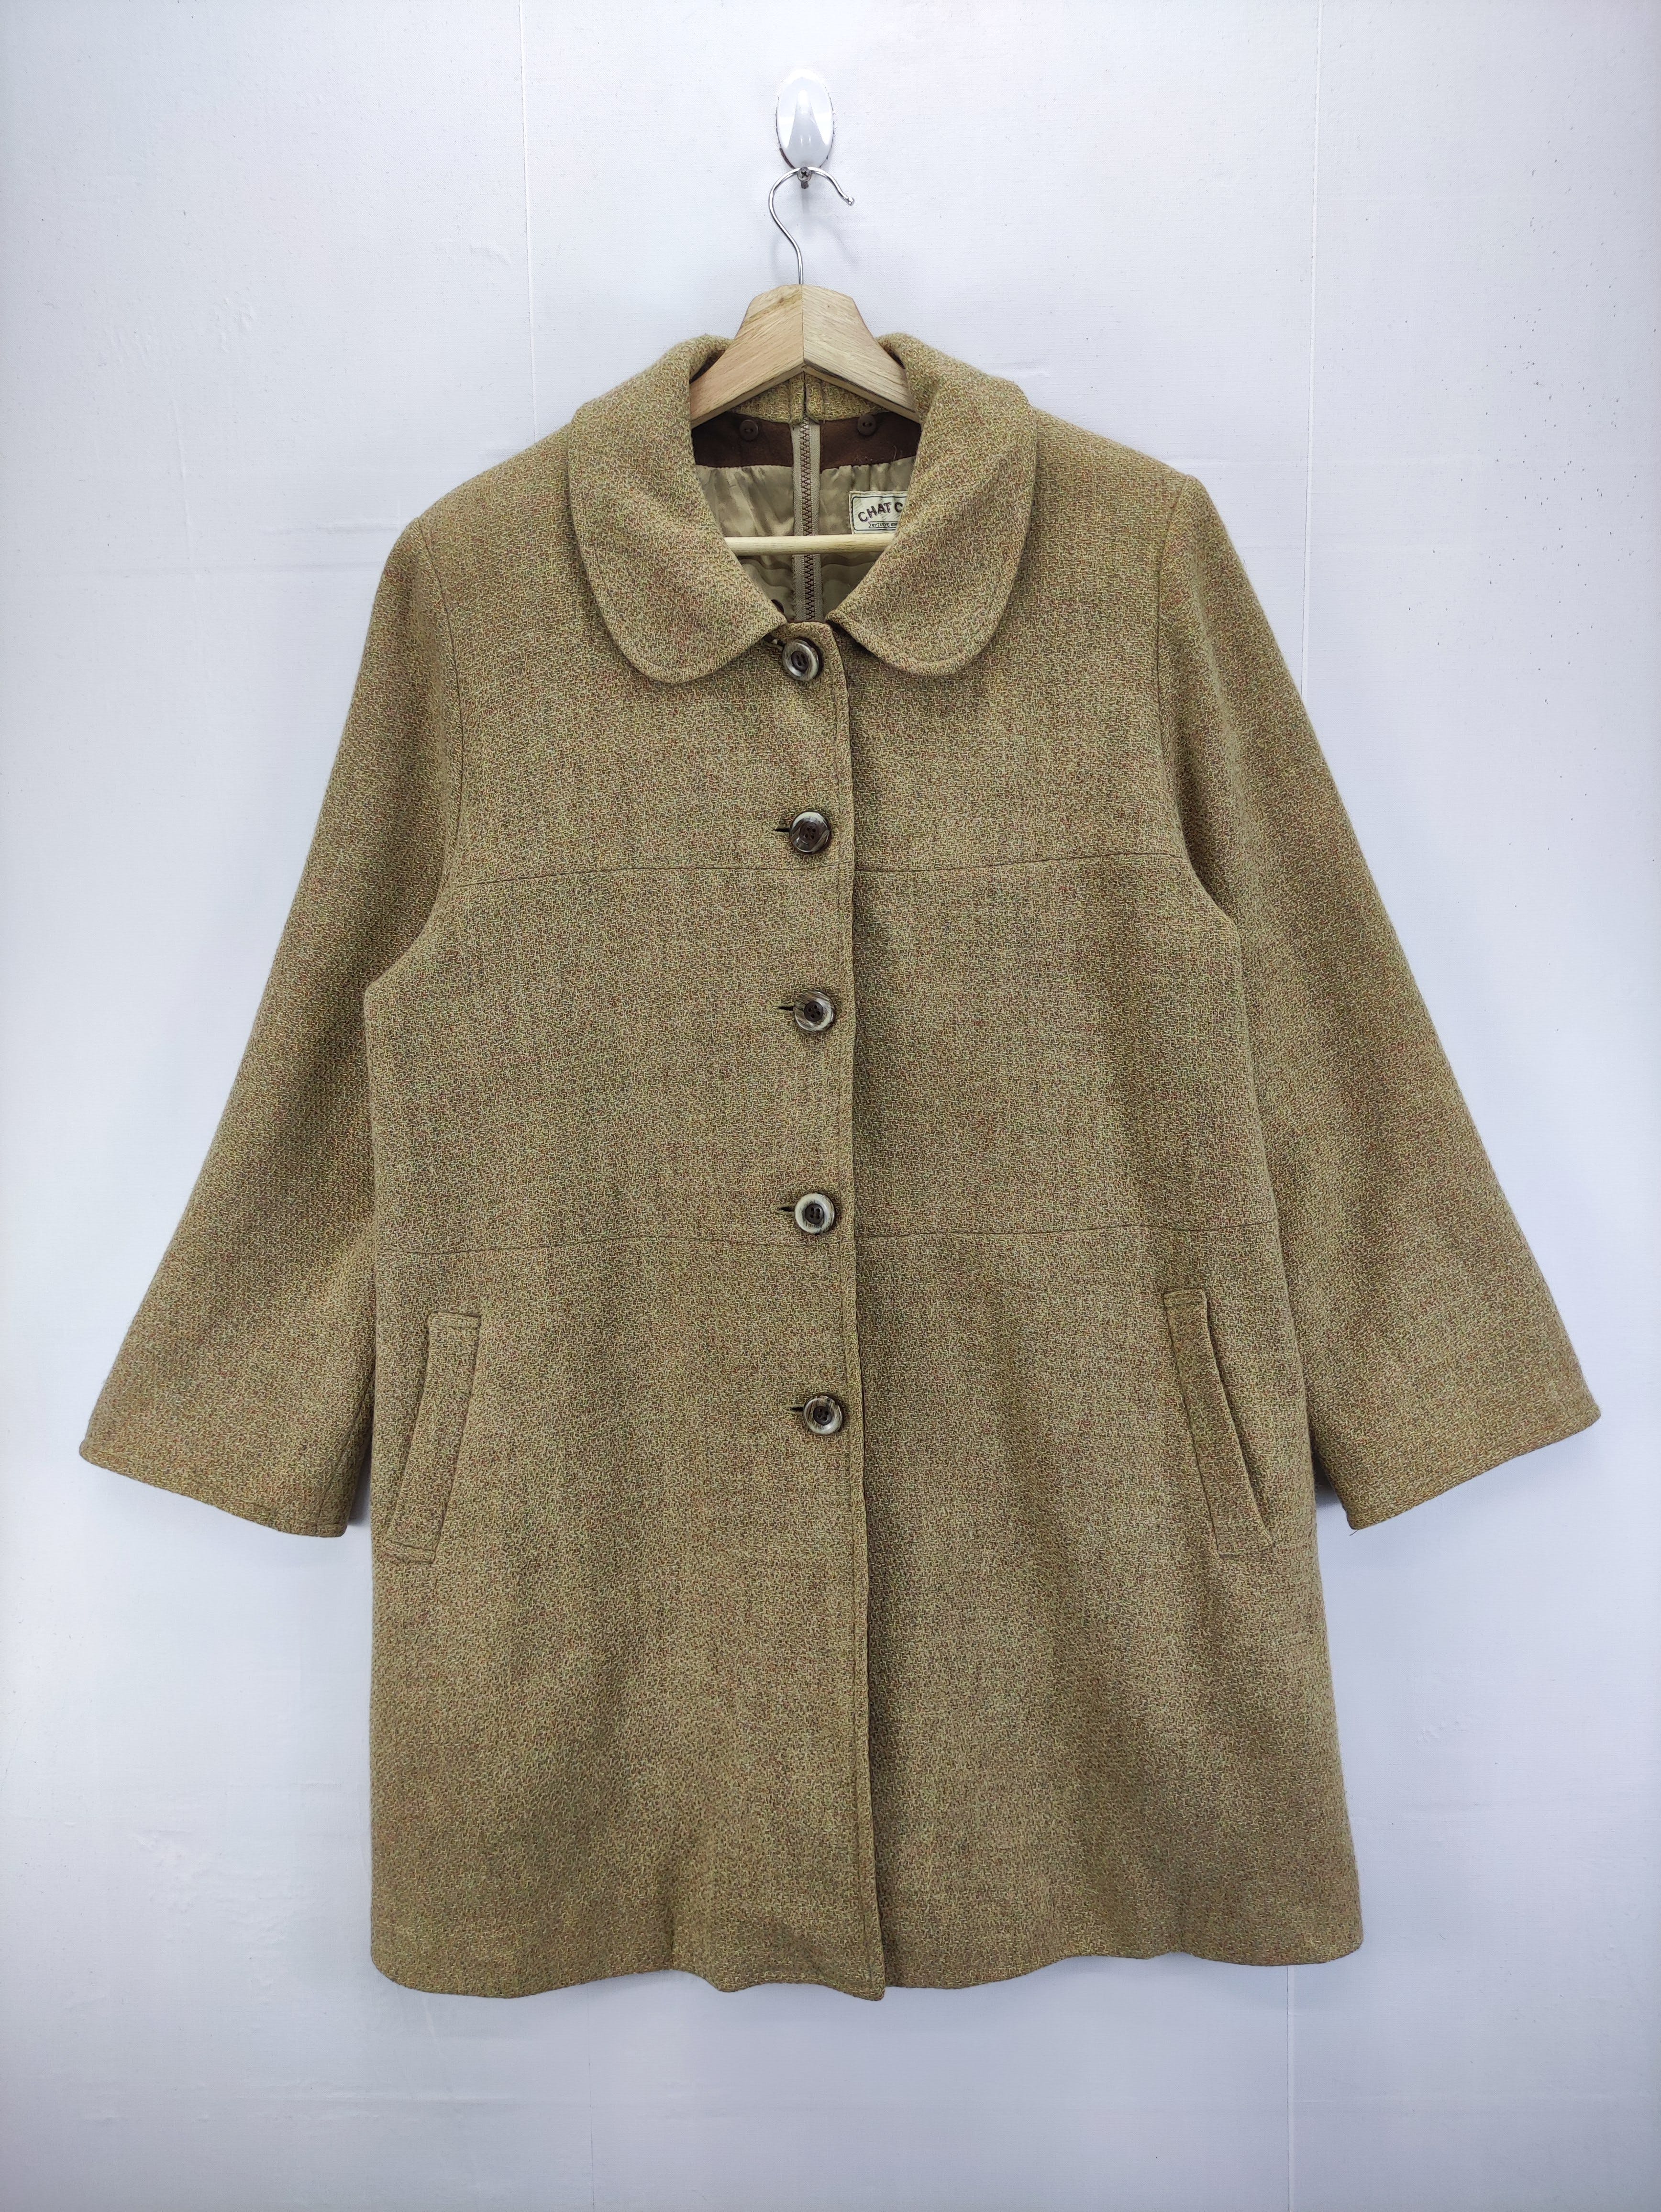 Vintage Wool Jacket Button Up Zipper By Chat Club - 1